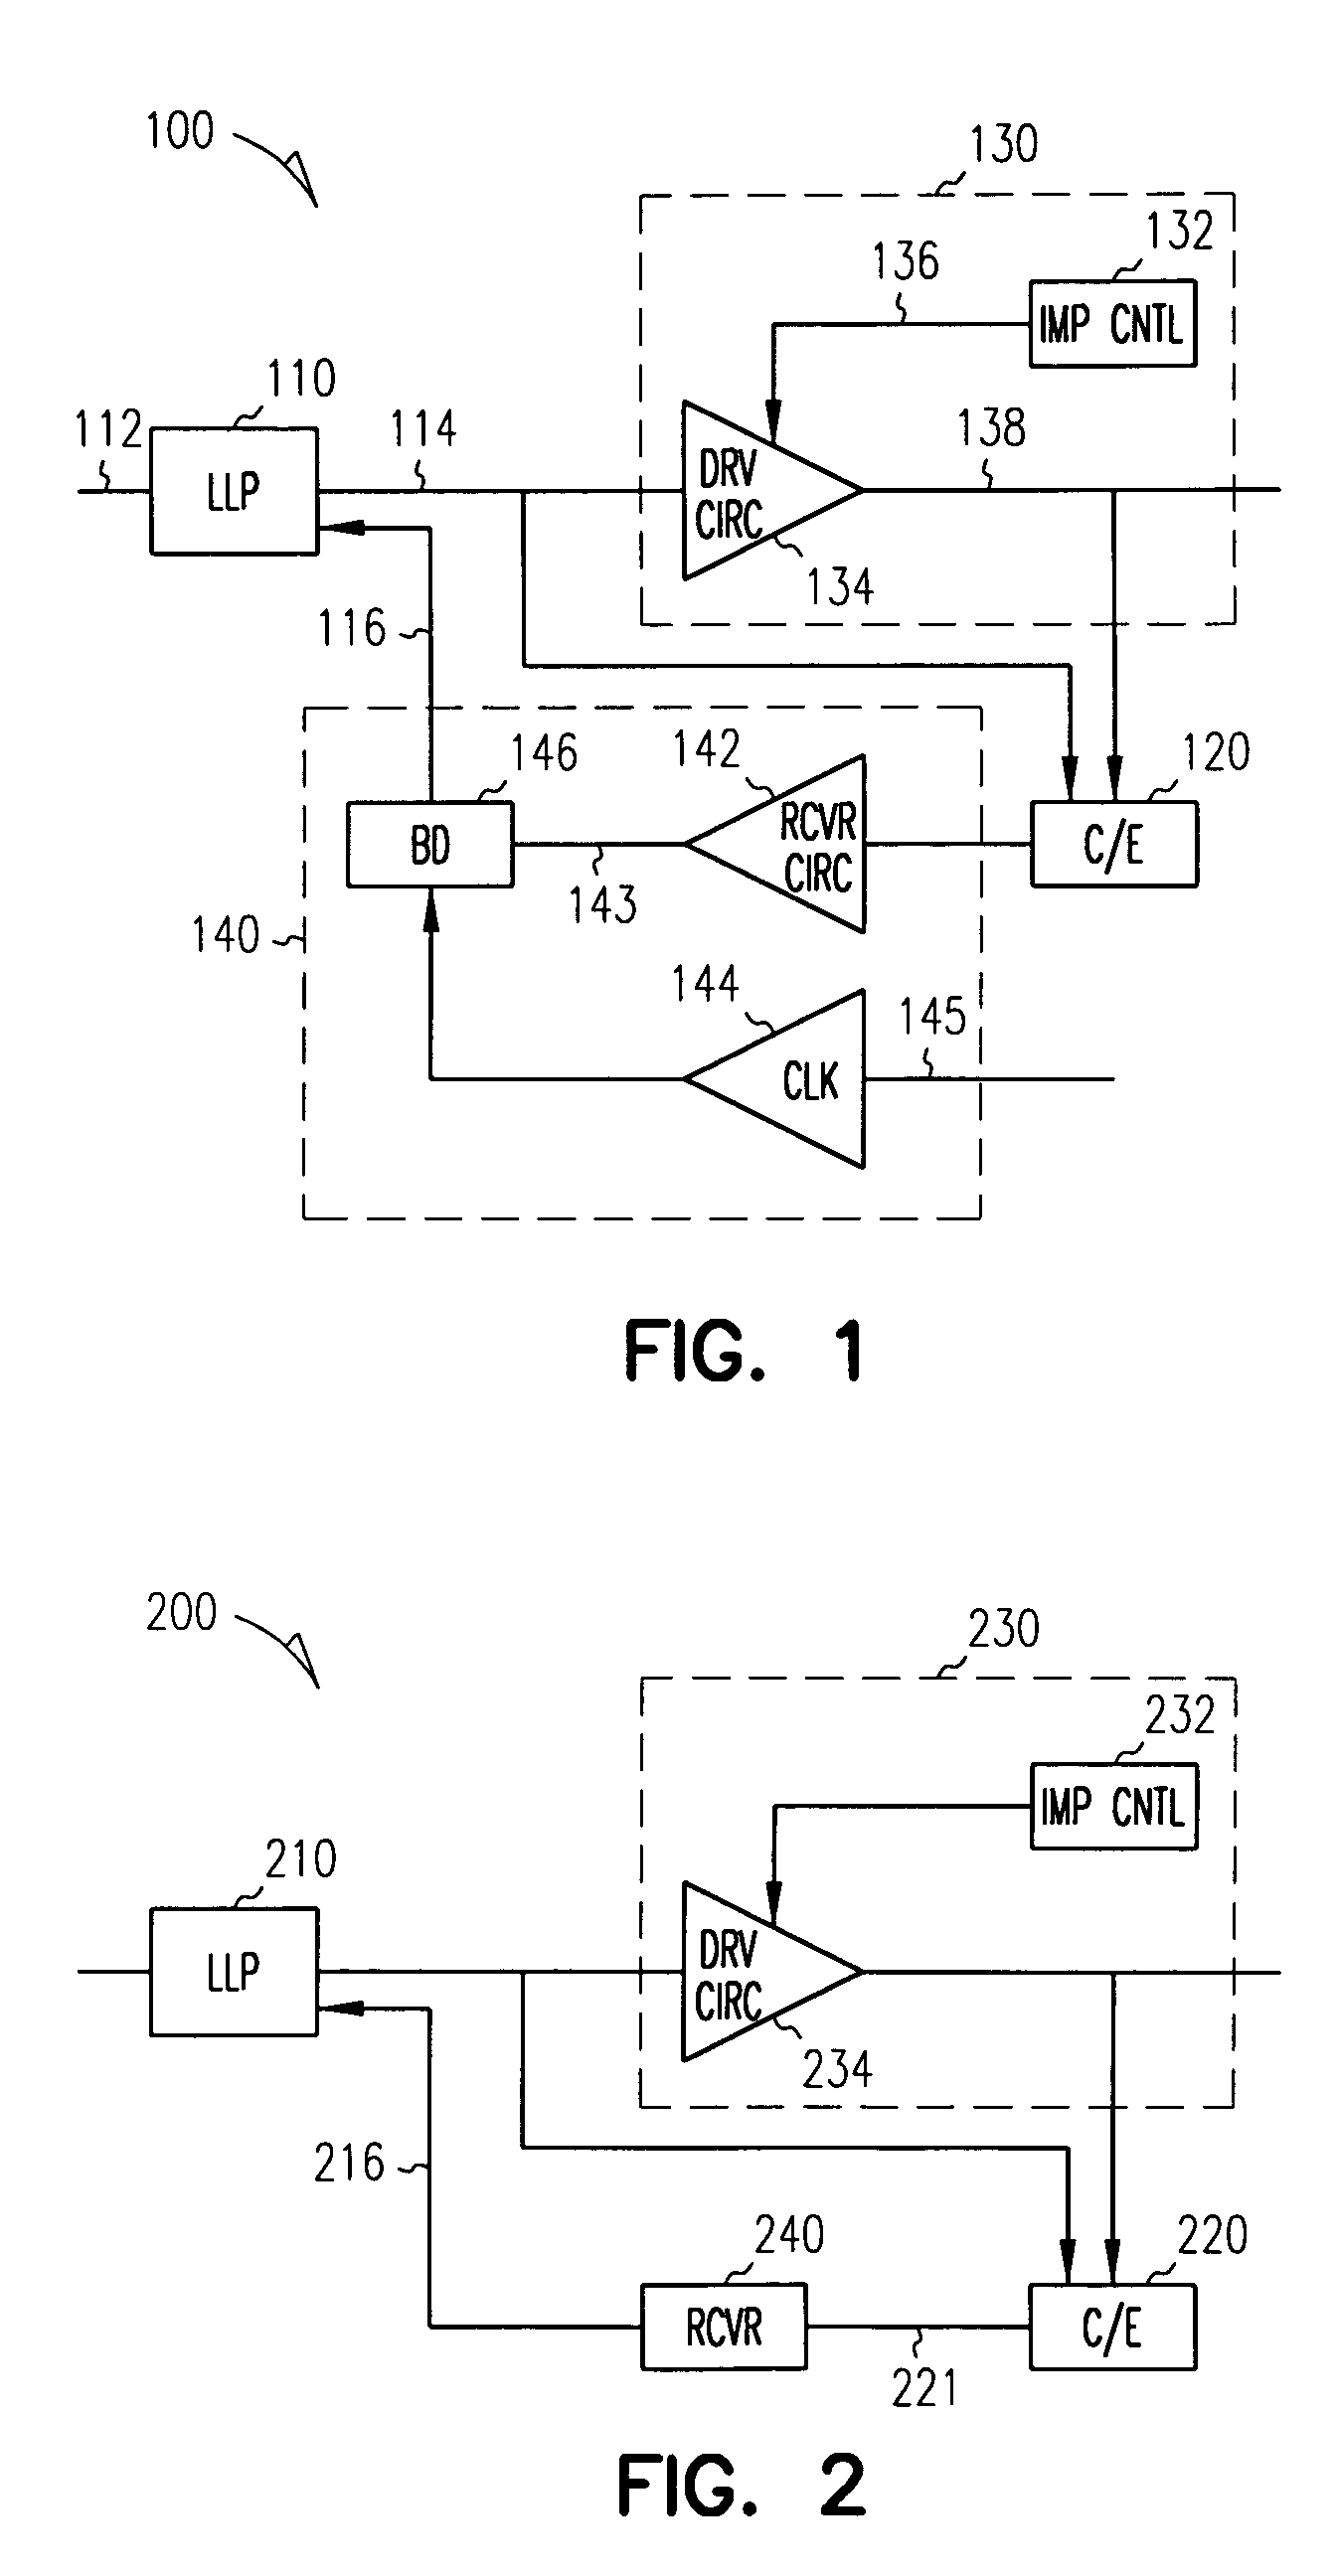 Method and apparatus for communicating computer data from one point to another over a communications medium